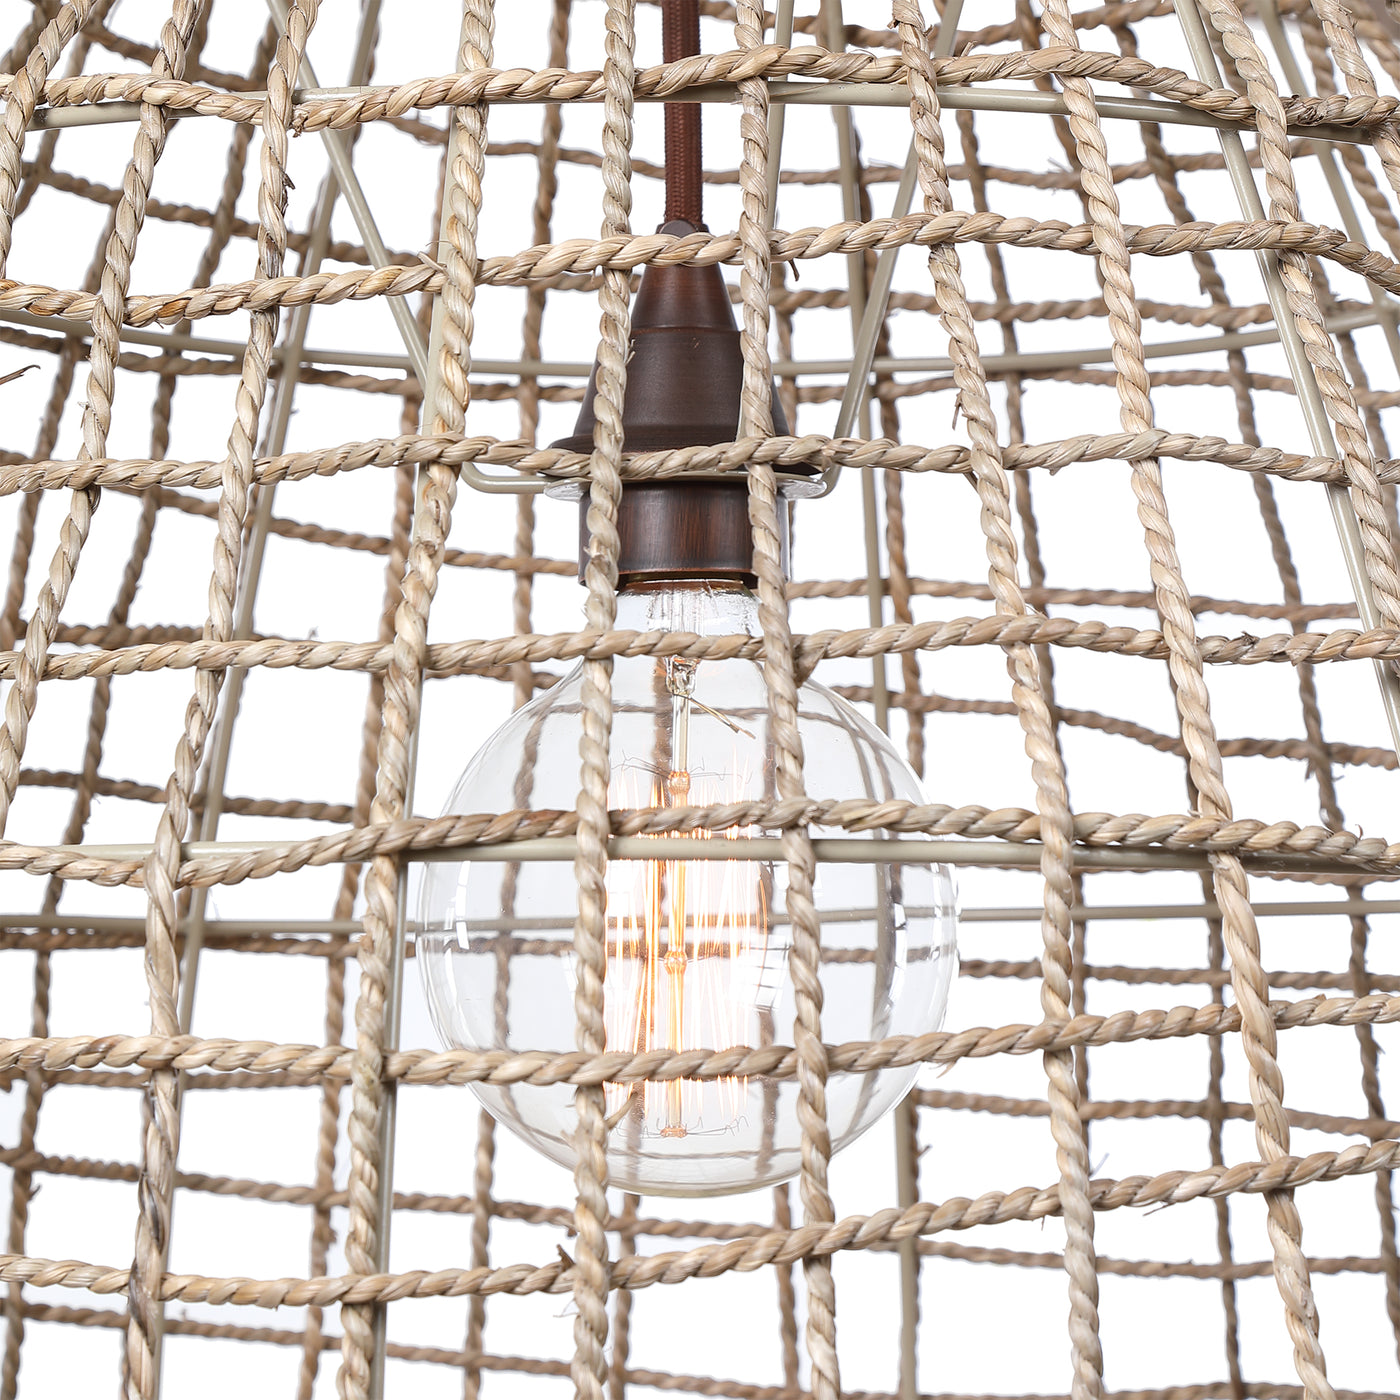 Natural Woven Seagrass In A Cross-weave Pattern Gives Us This Wonderful Airy 1 Lt. Pendant With Brushed Aged Bronze Detail...